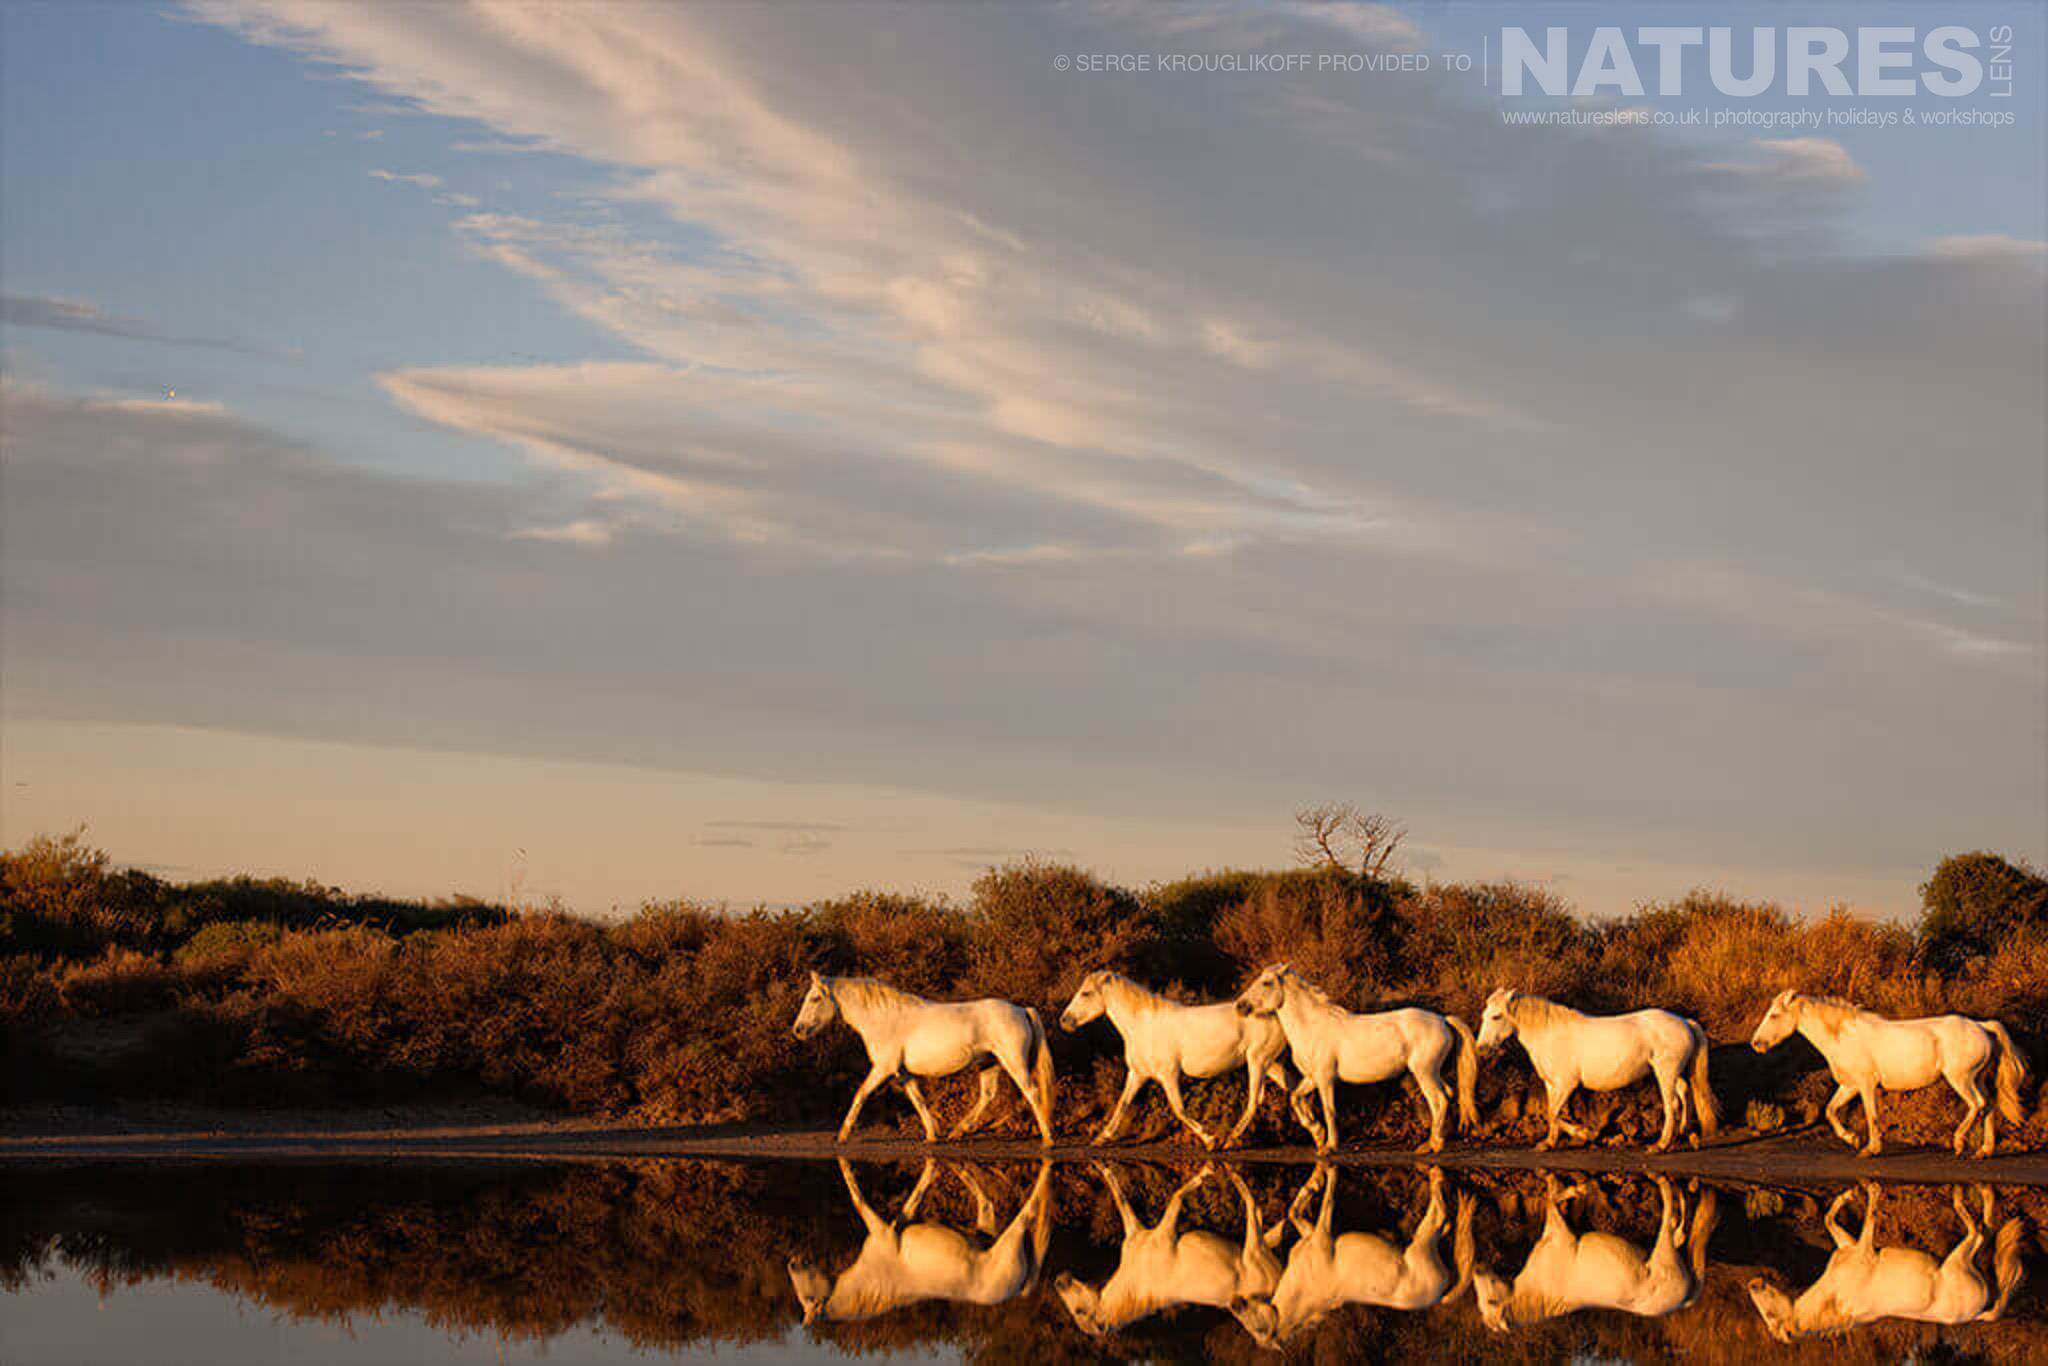 A Perfect Reflection Of White Horses Walking In Single File At Sunset Typical Of The Type Of Image That May Be Captured During The Natureslens Wild White Horses Of The Camargue Photography Holiday